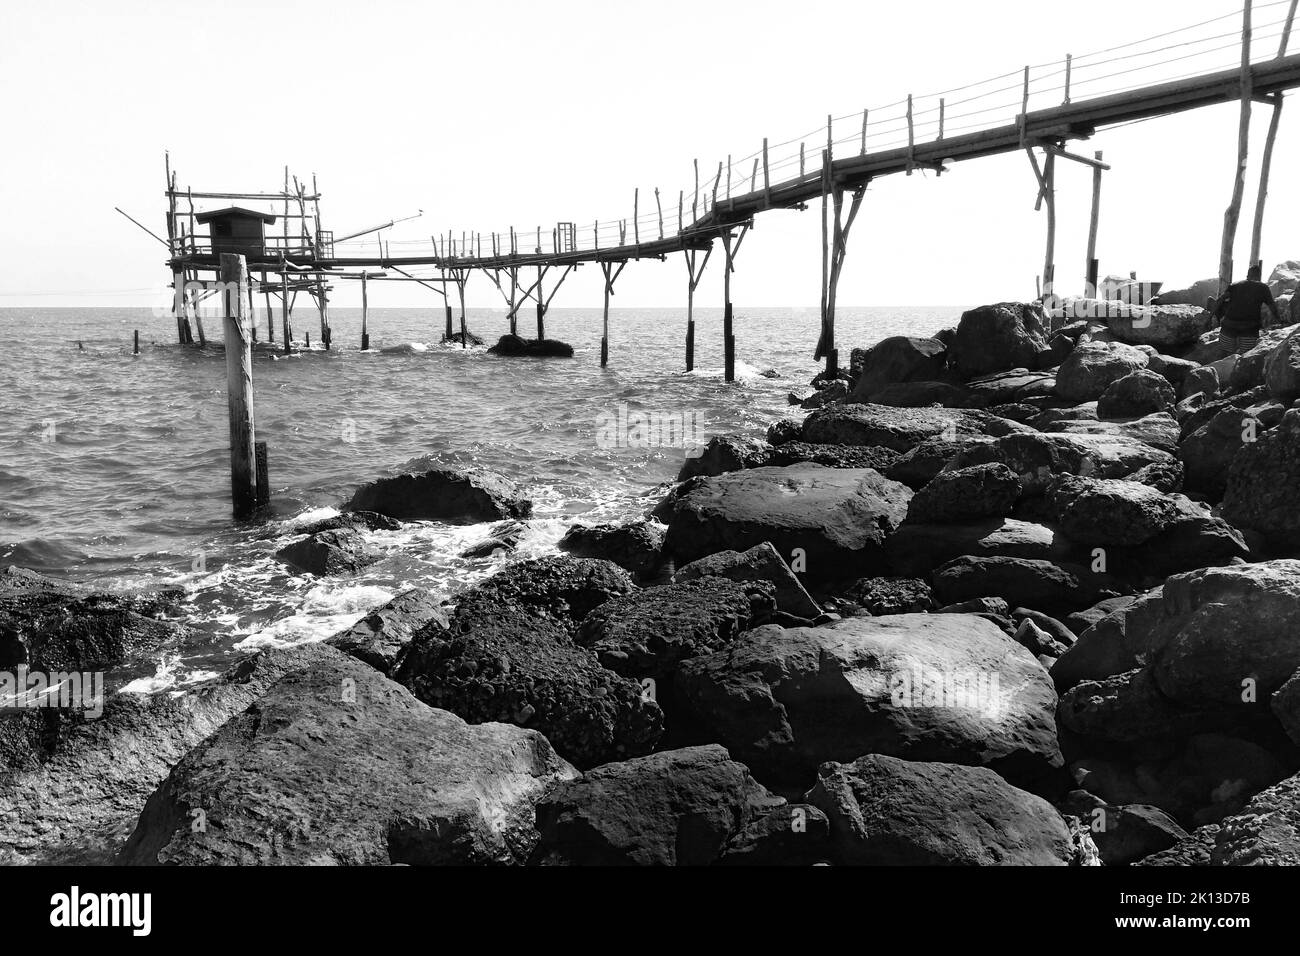 A grayscale of a rocky coast with an old wooden pier Stock Photo